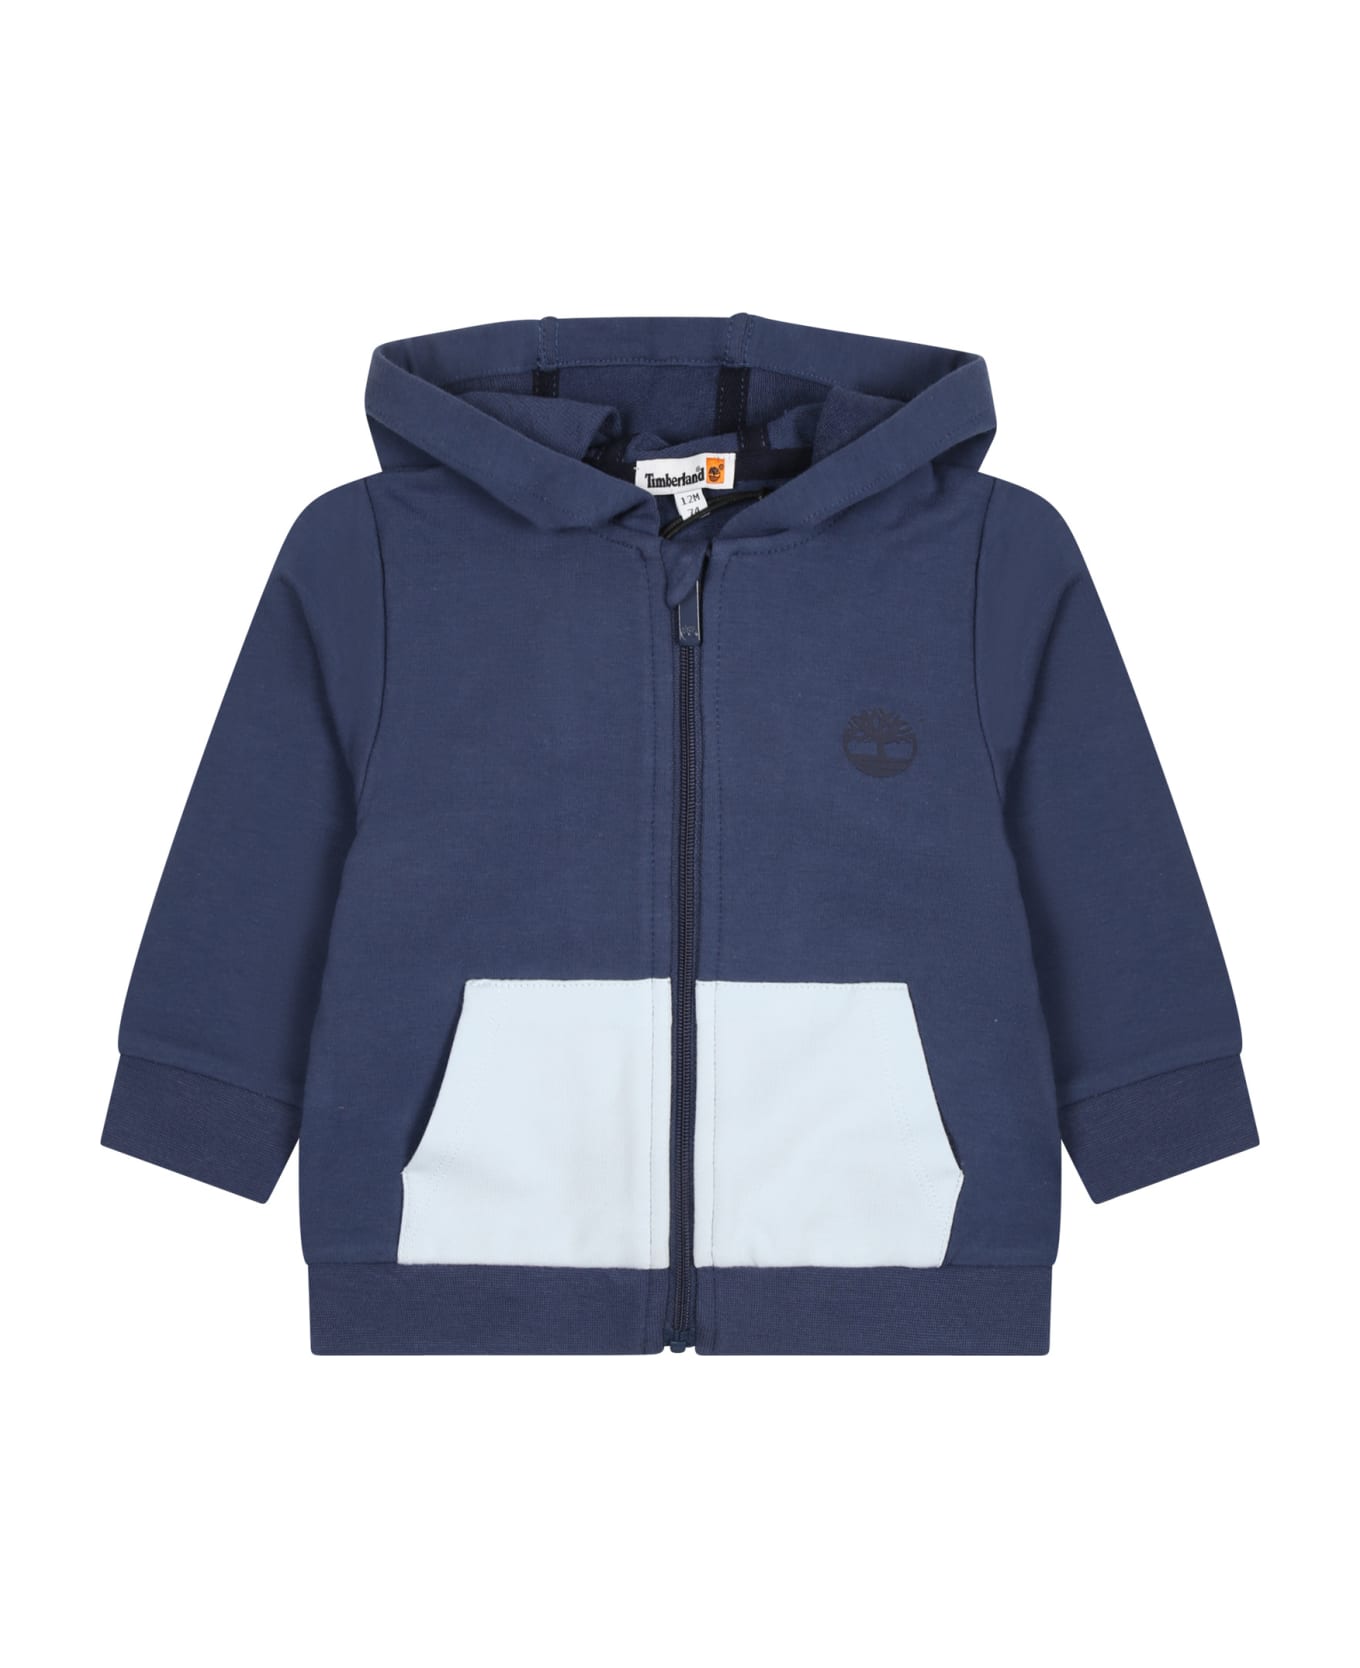 Timberland Blue Hooded Sweatshirt For Baby Boy With Logo - Blue